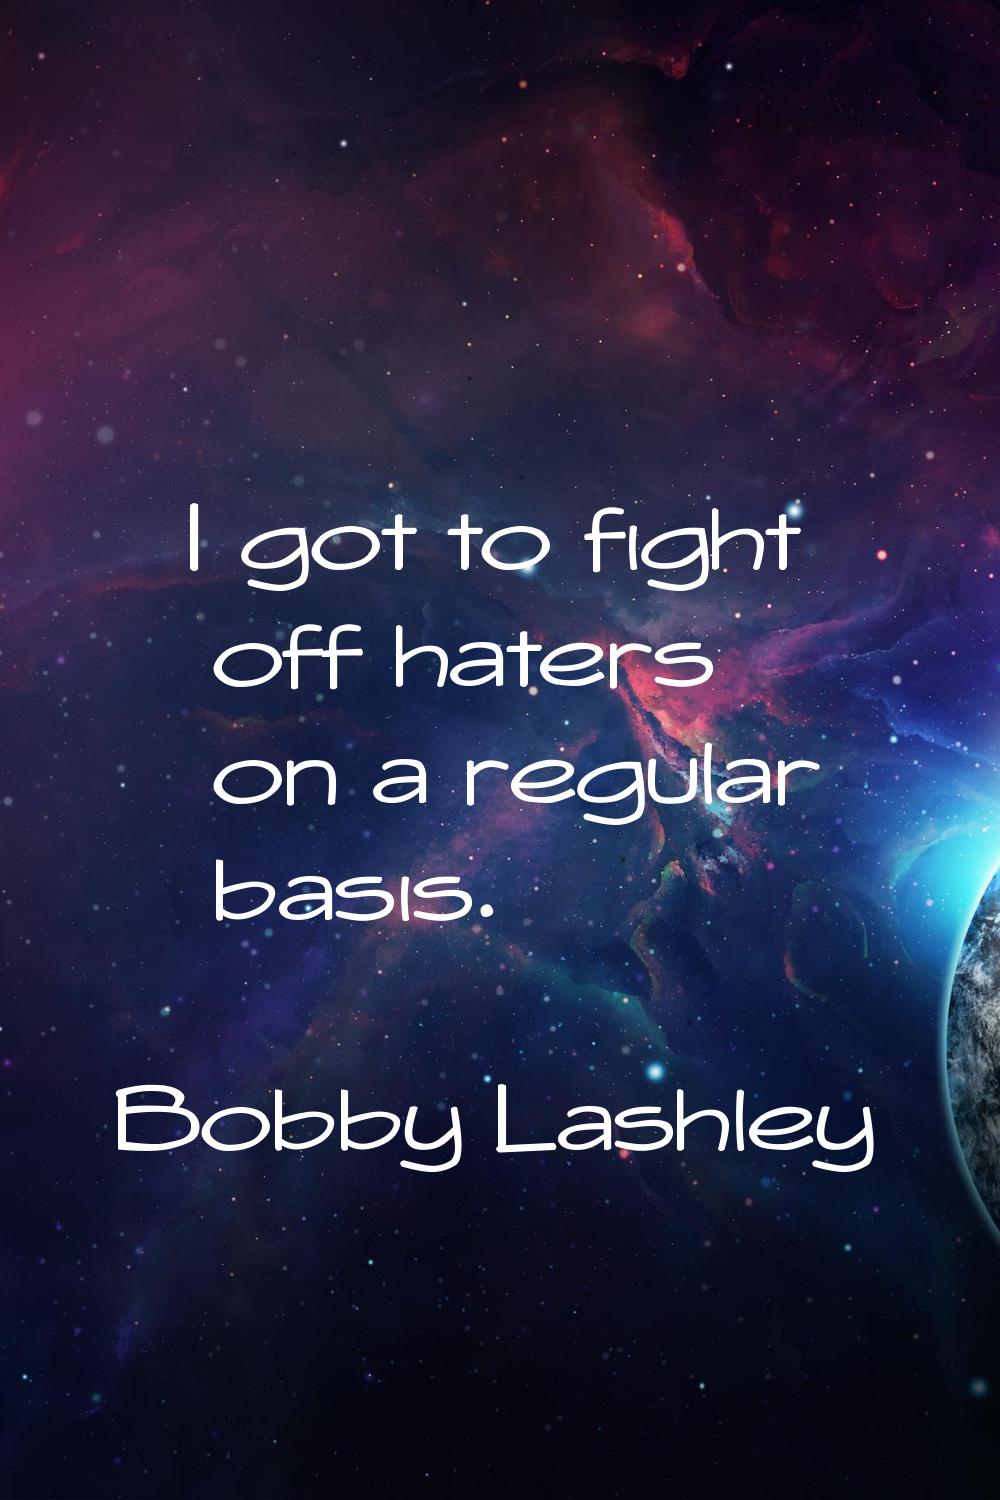 I got to fight off haters on a regular basis.